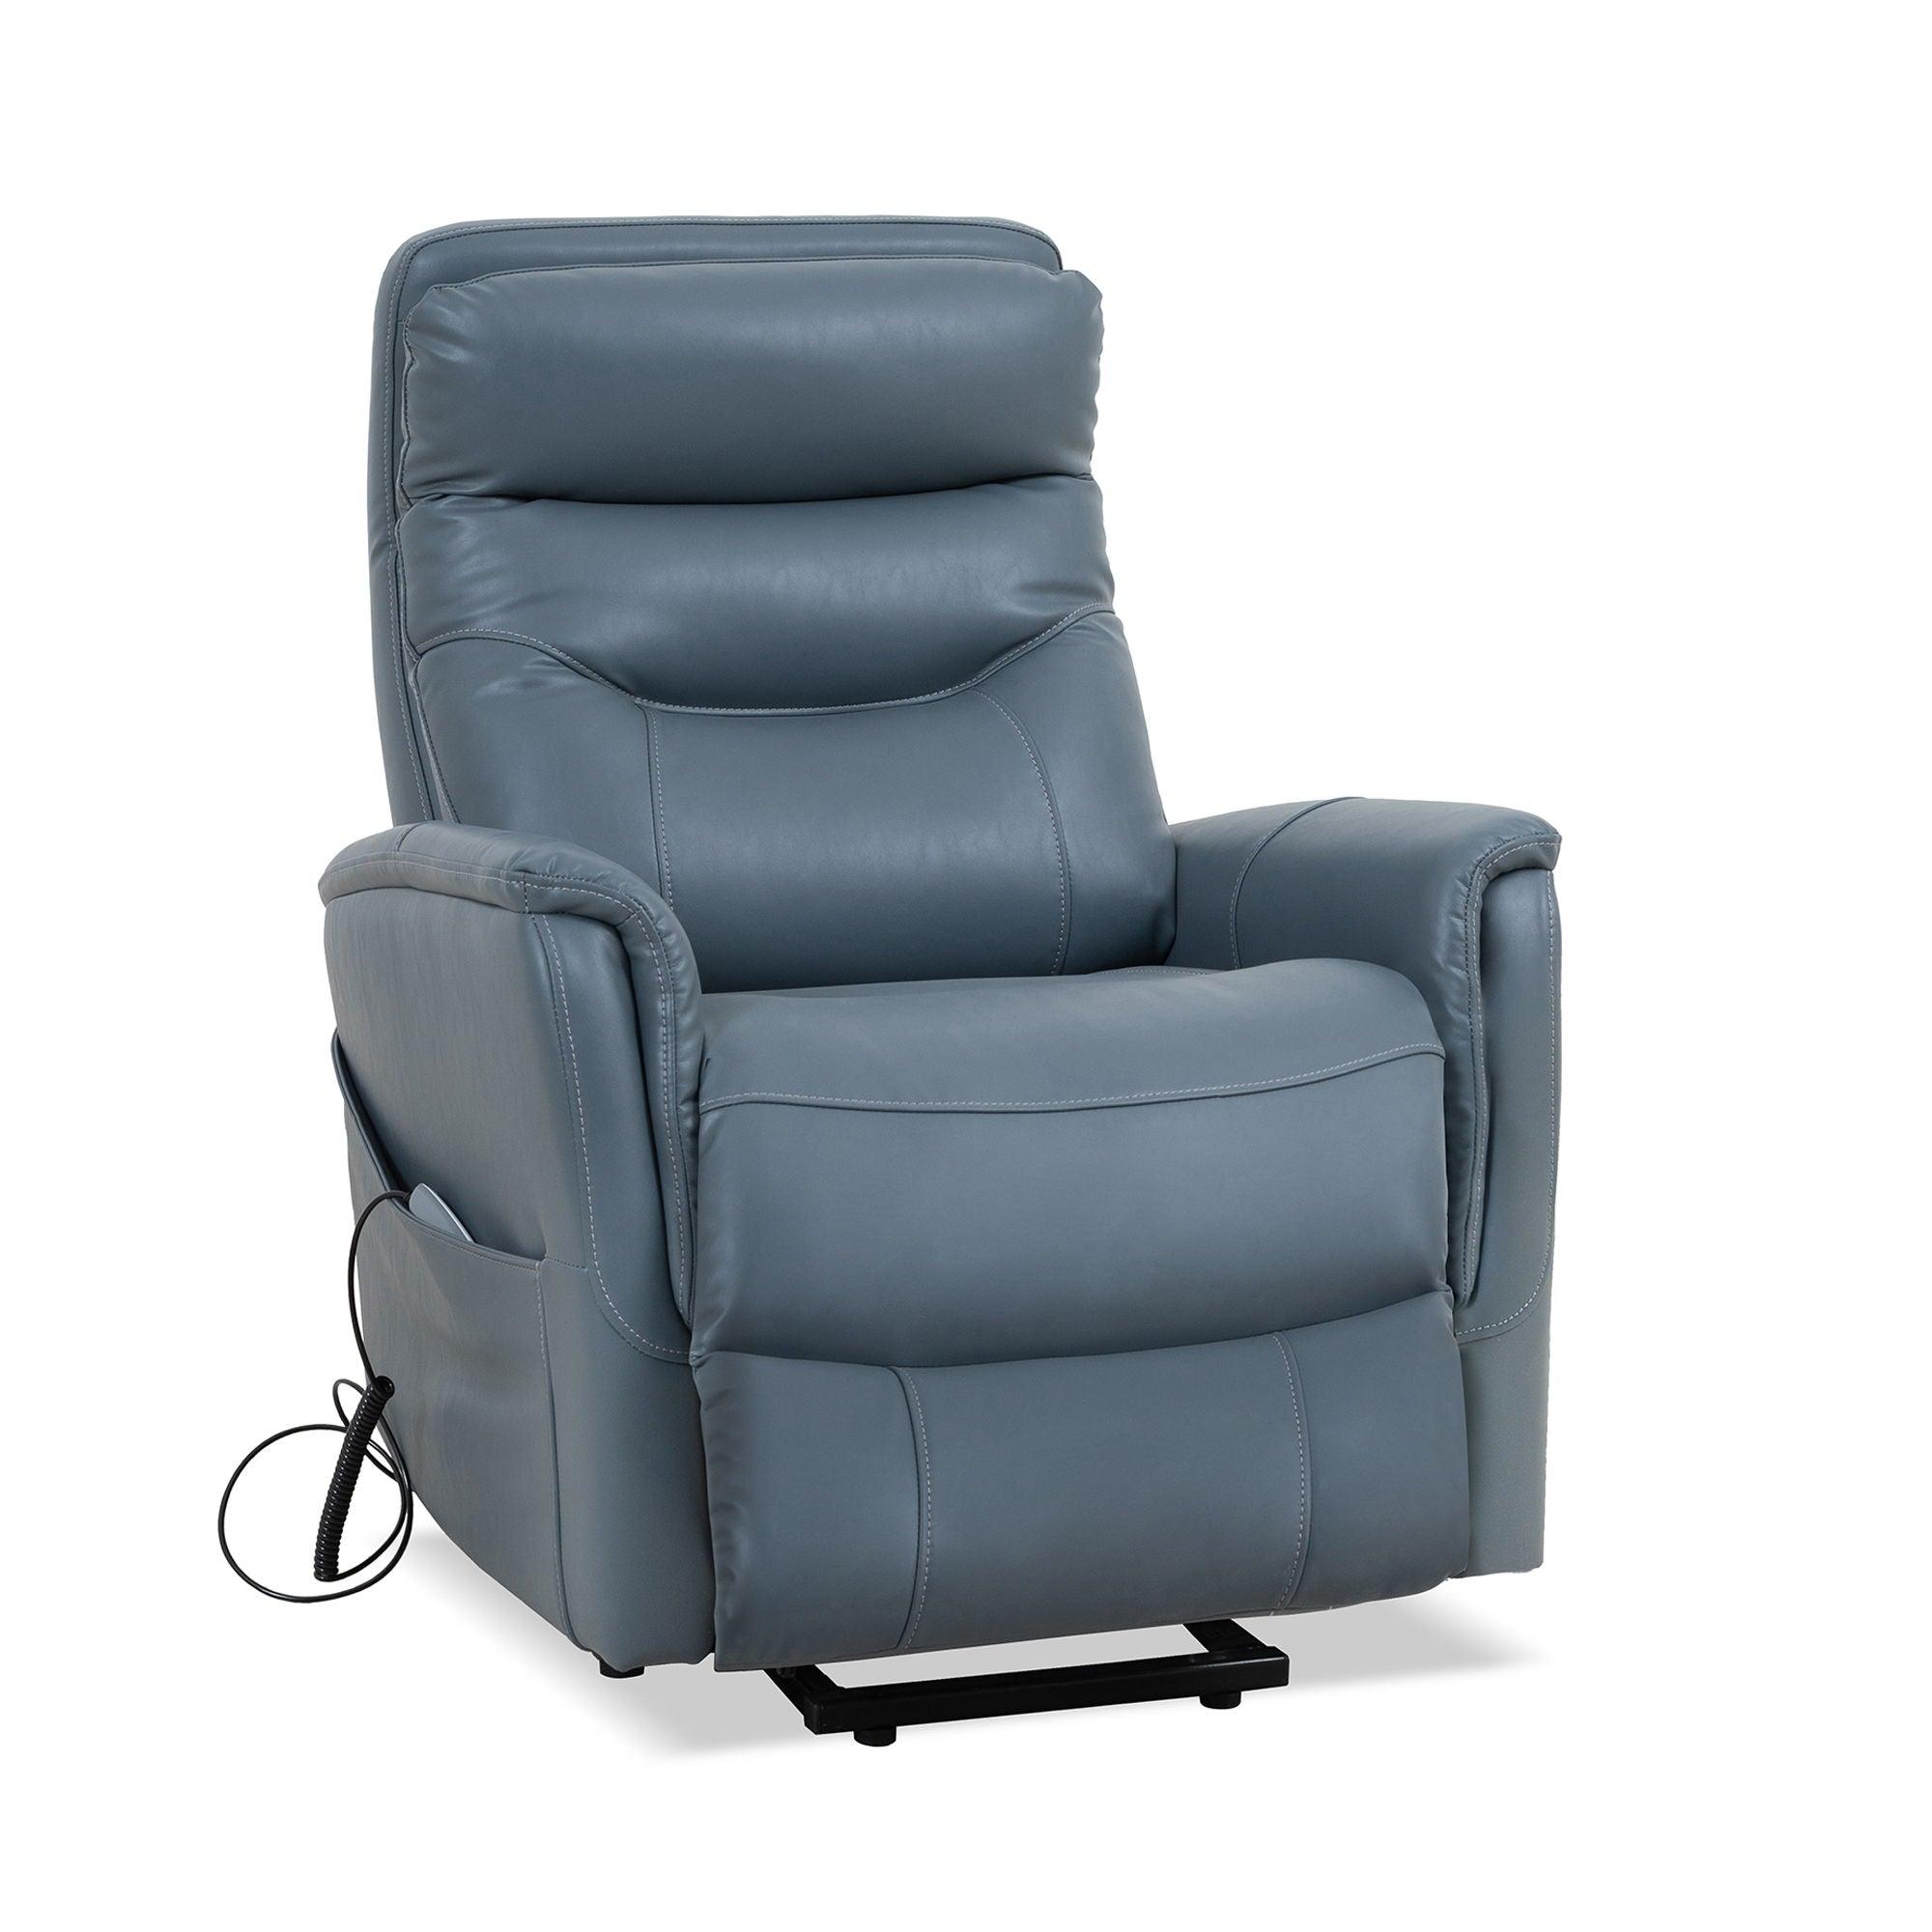 Parker Living - Gemini - Power Lift Recliner With Articulating Headrest - 5th Avenue Furniture